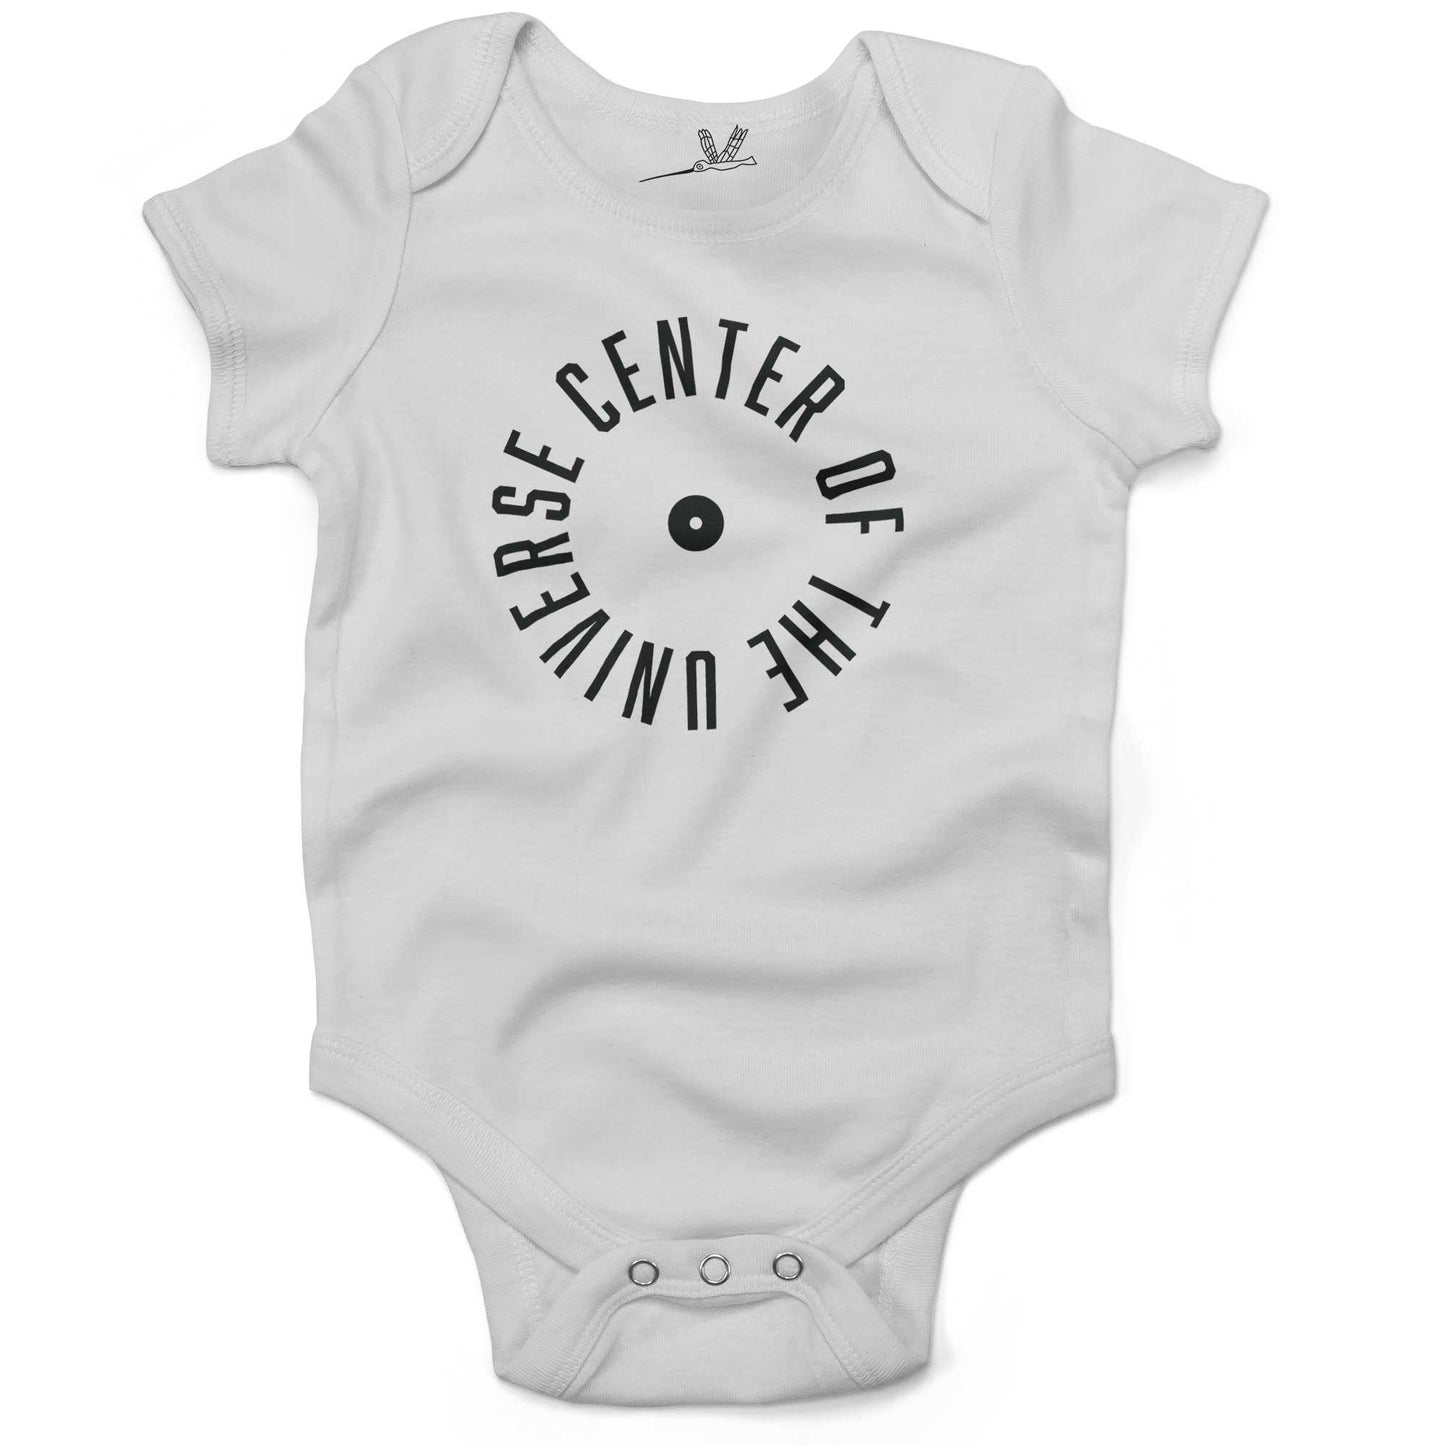 Center Of The Universe Baby One Piece or Raglan Tee-White-3-6 months